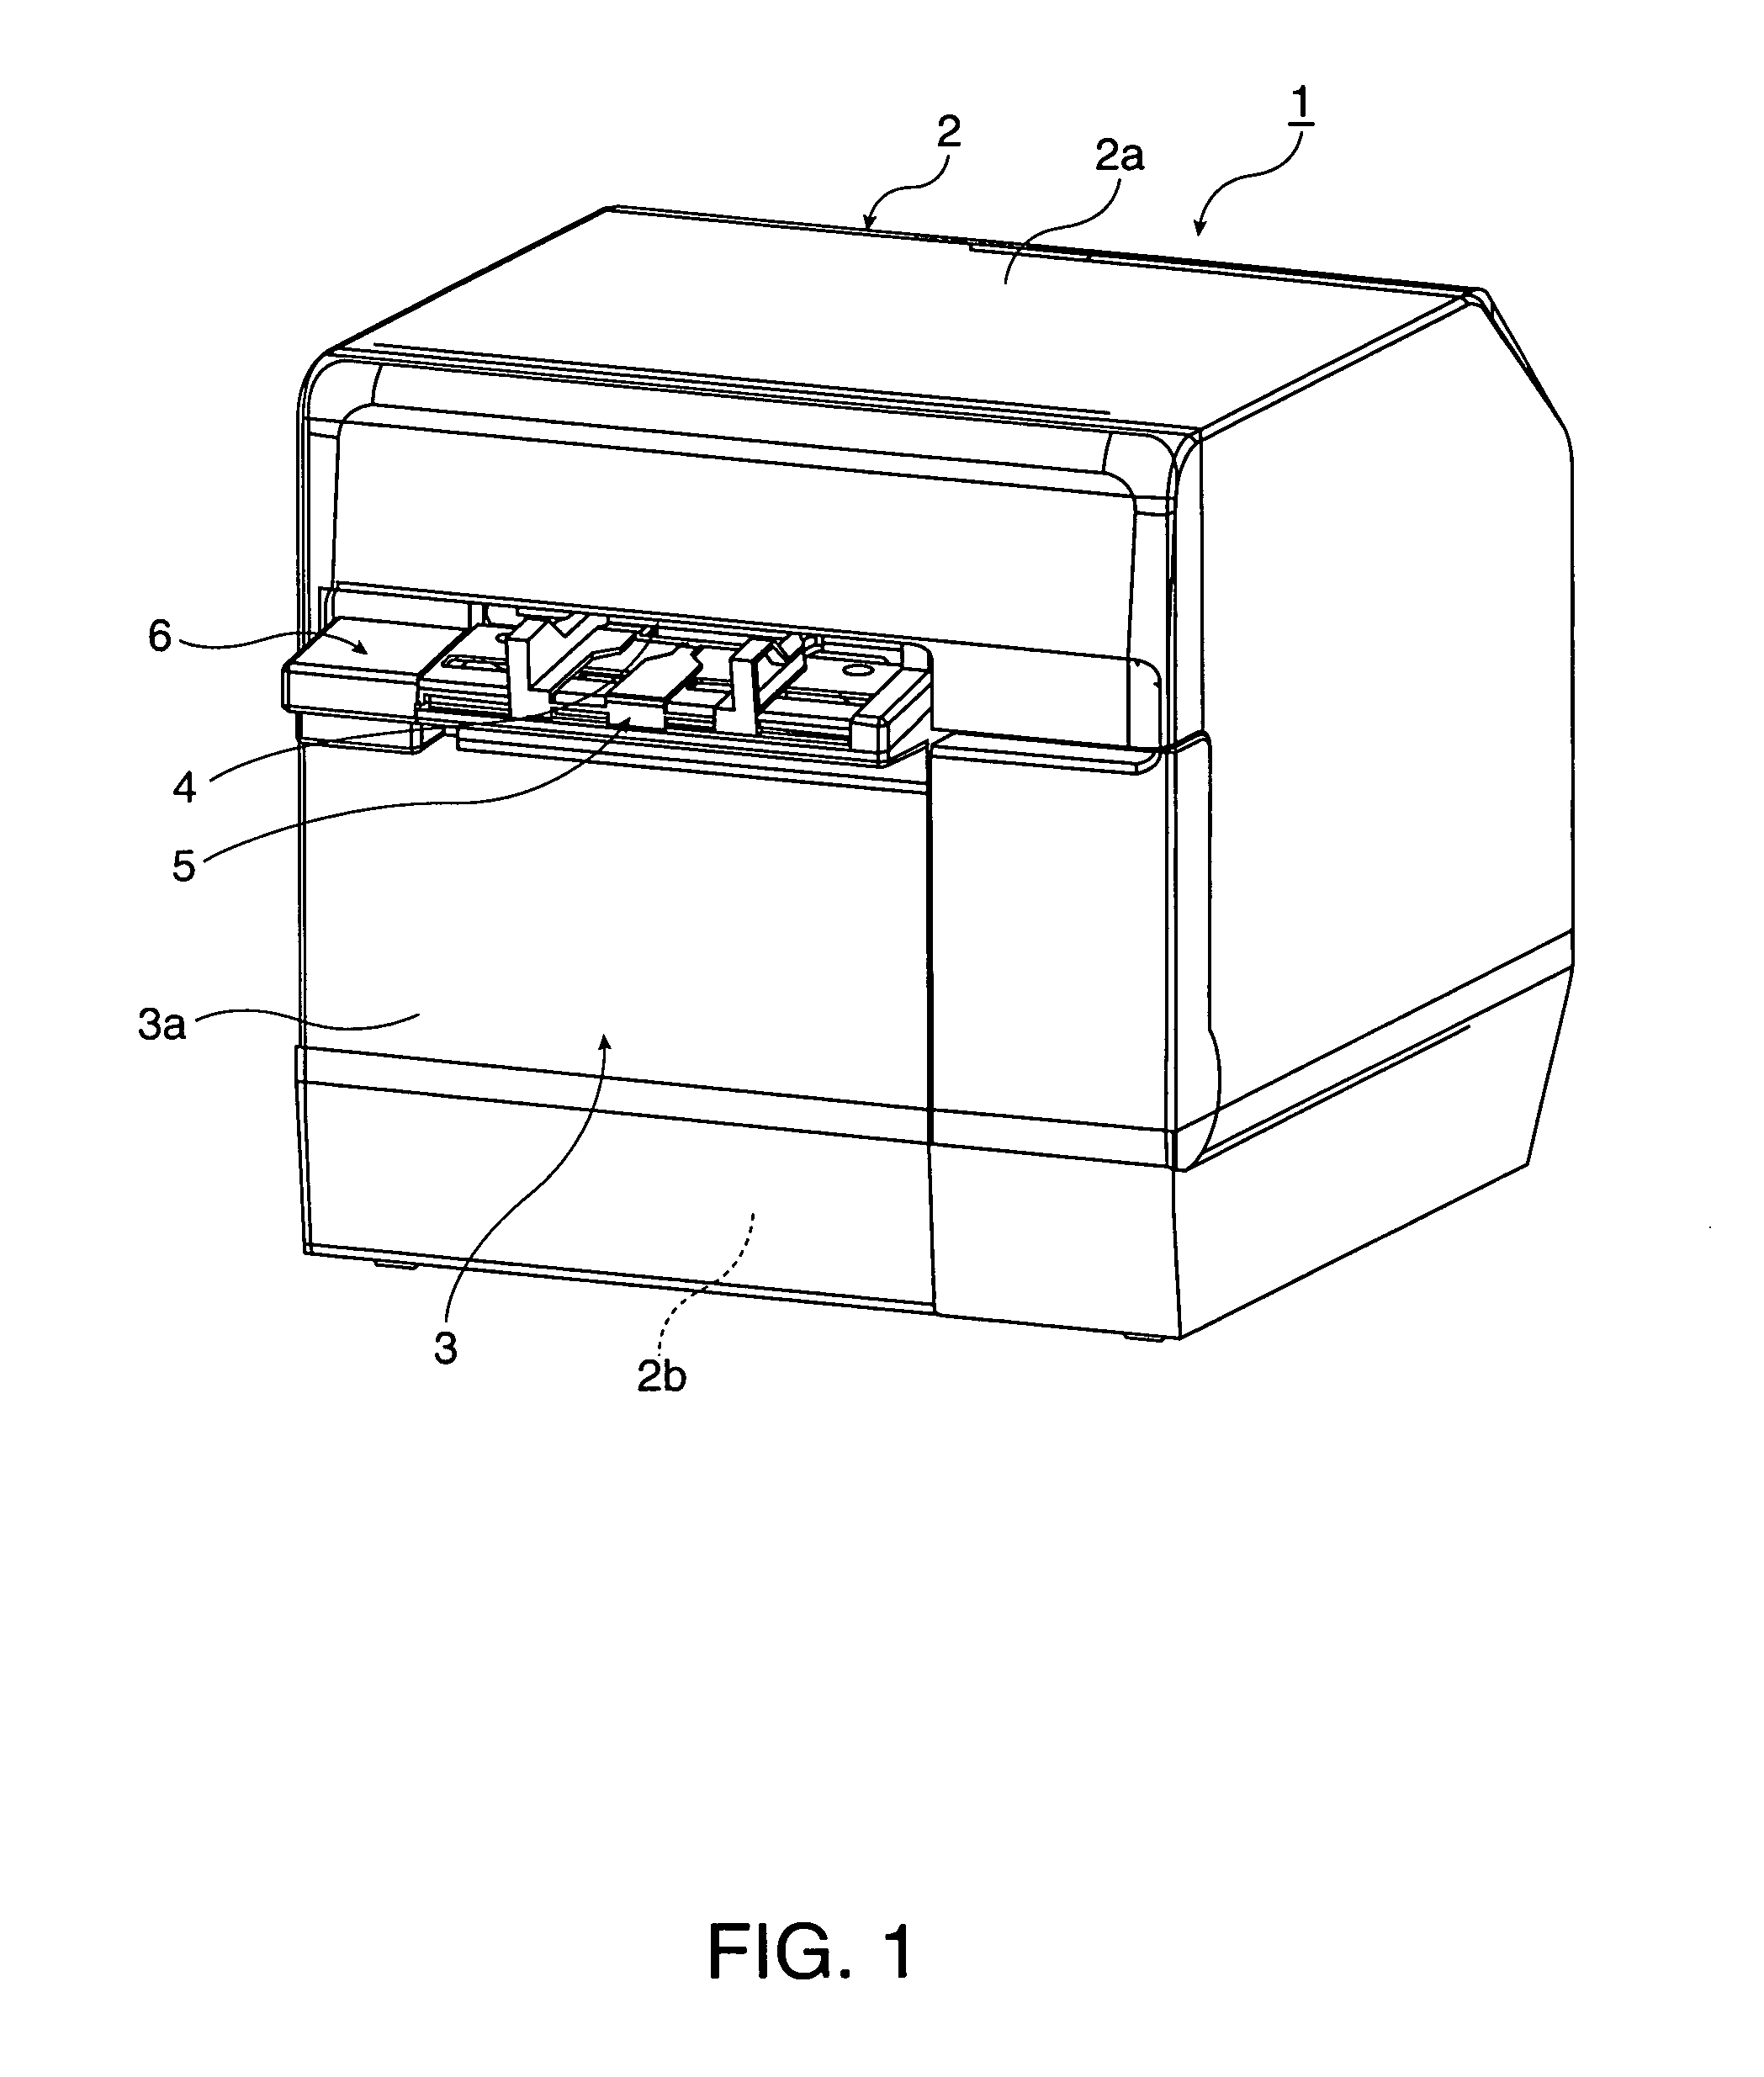 Paper supply mechanism and roll paper printer